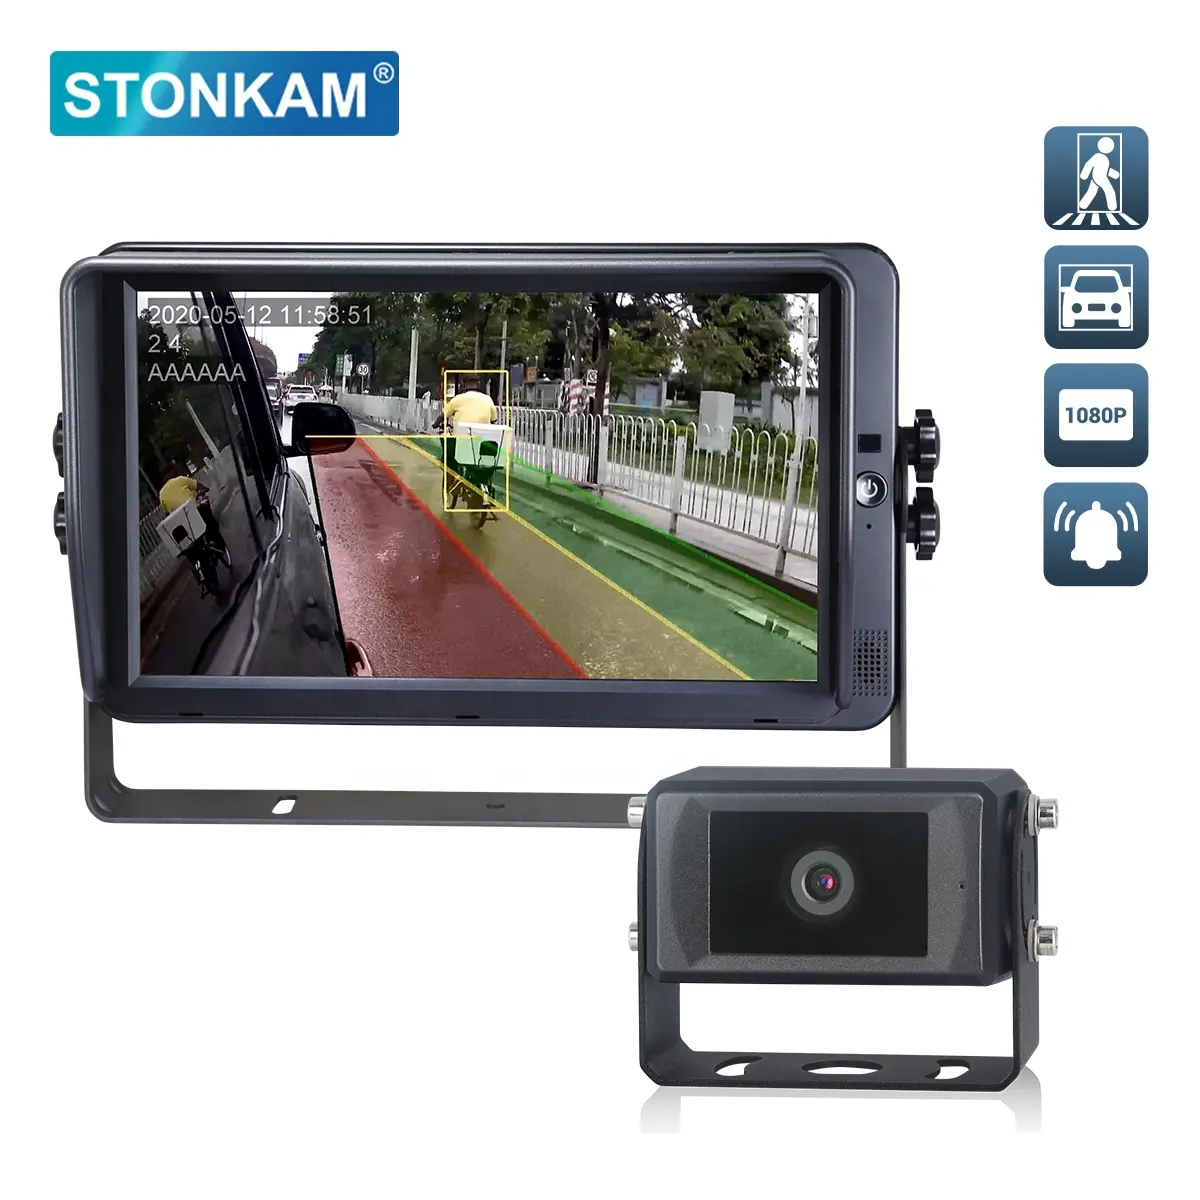 STONKAM Smart Backup Camera Blind Spot Detection AI-Powered IP69K Rated Vehicle Safety System